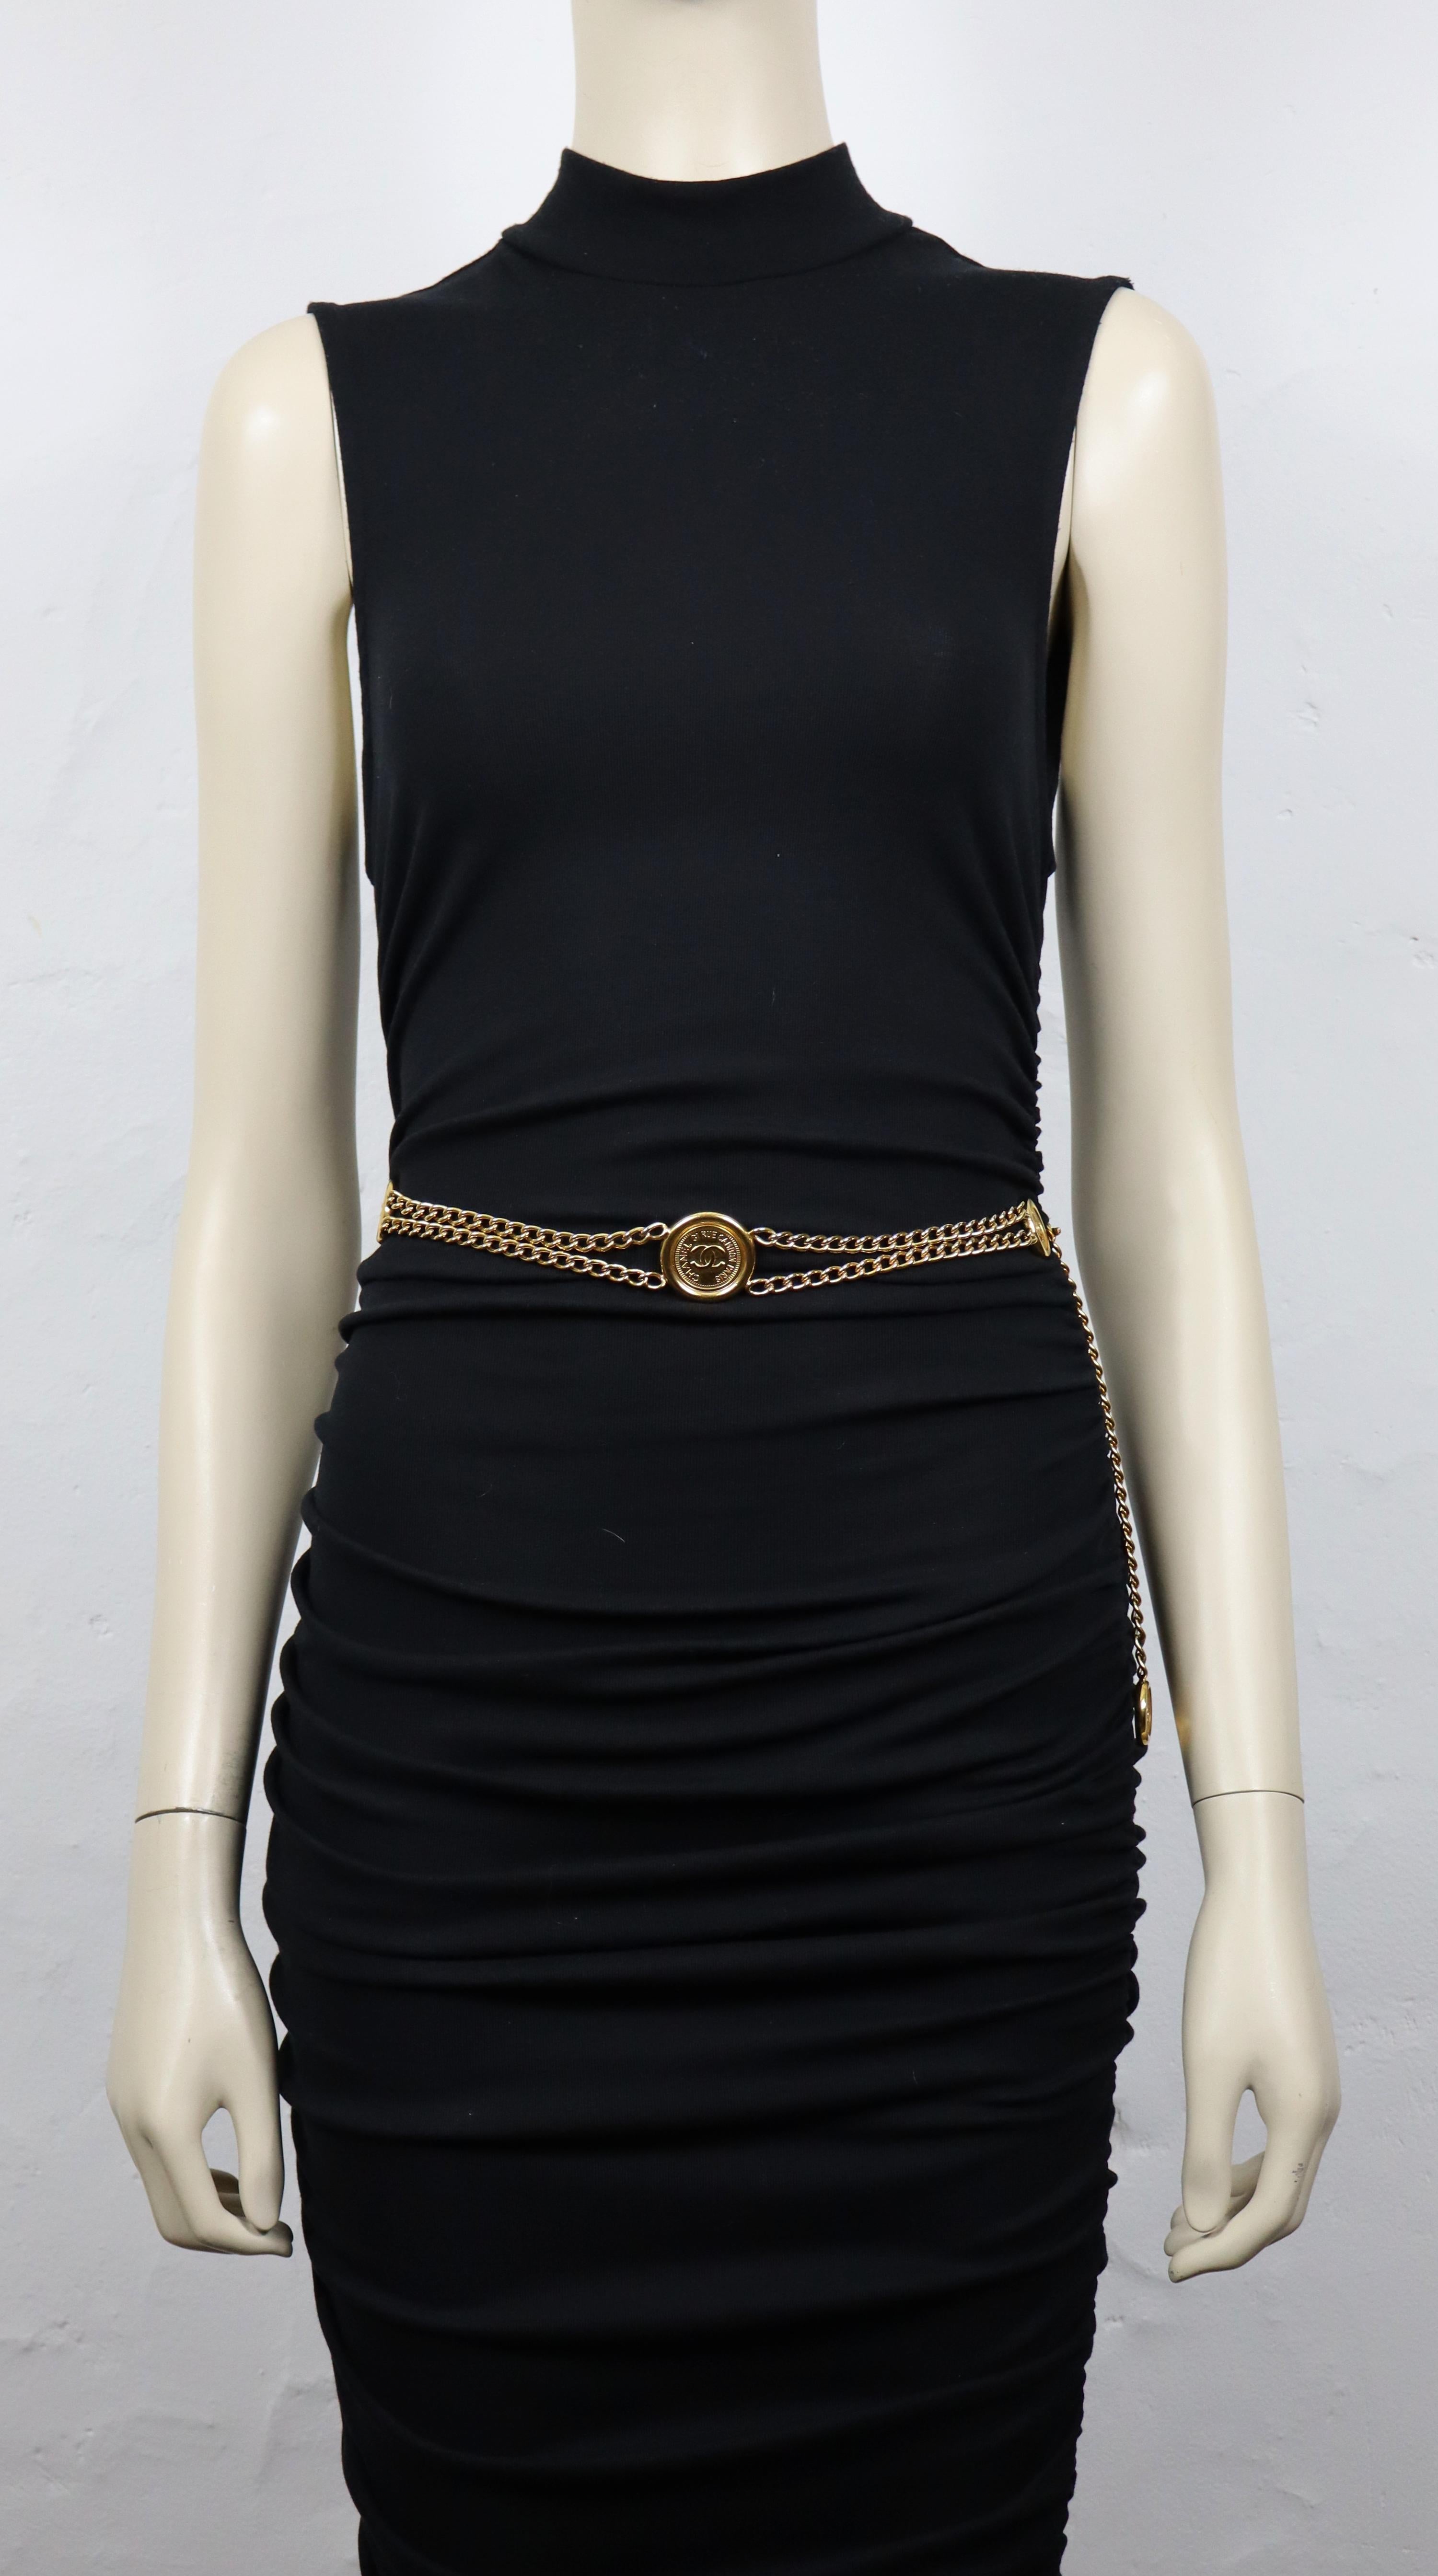 CHANEL by KARL LAGERFELD vintage gold tone chain belt featuring Chanel 31 Rue Cambon Paris CC coins.

Spring 1998 Collection.

Adjustable hook clasp closure.

Embossed CHANEL 98 P.

Indicative measurements : max. length approx. 81 cm (31.89 inches)